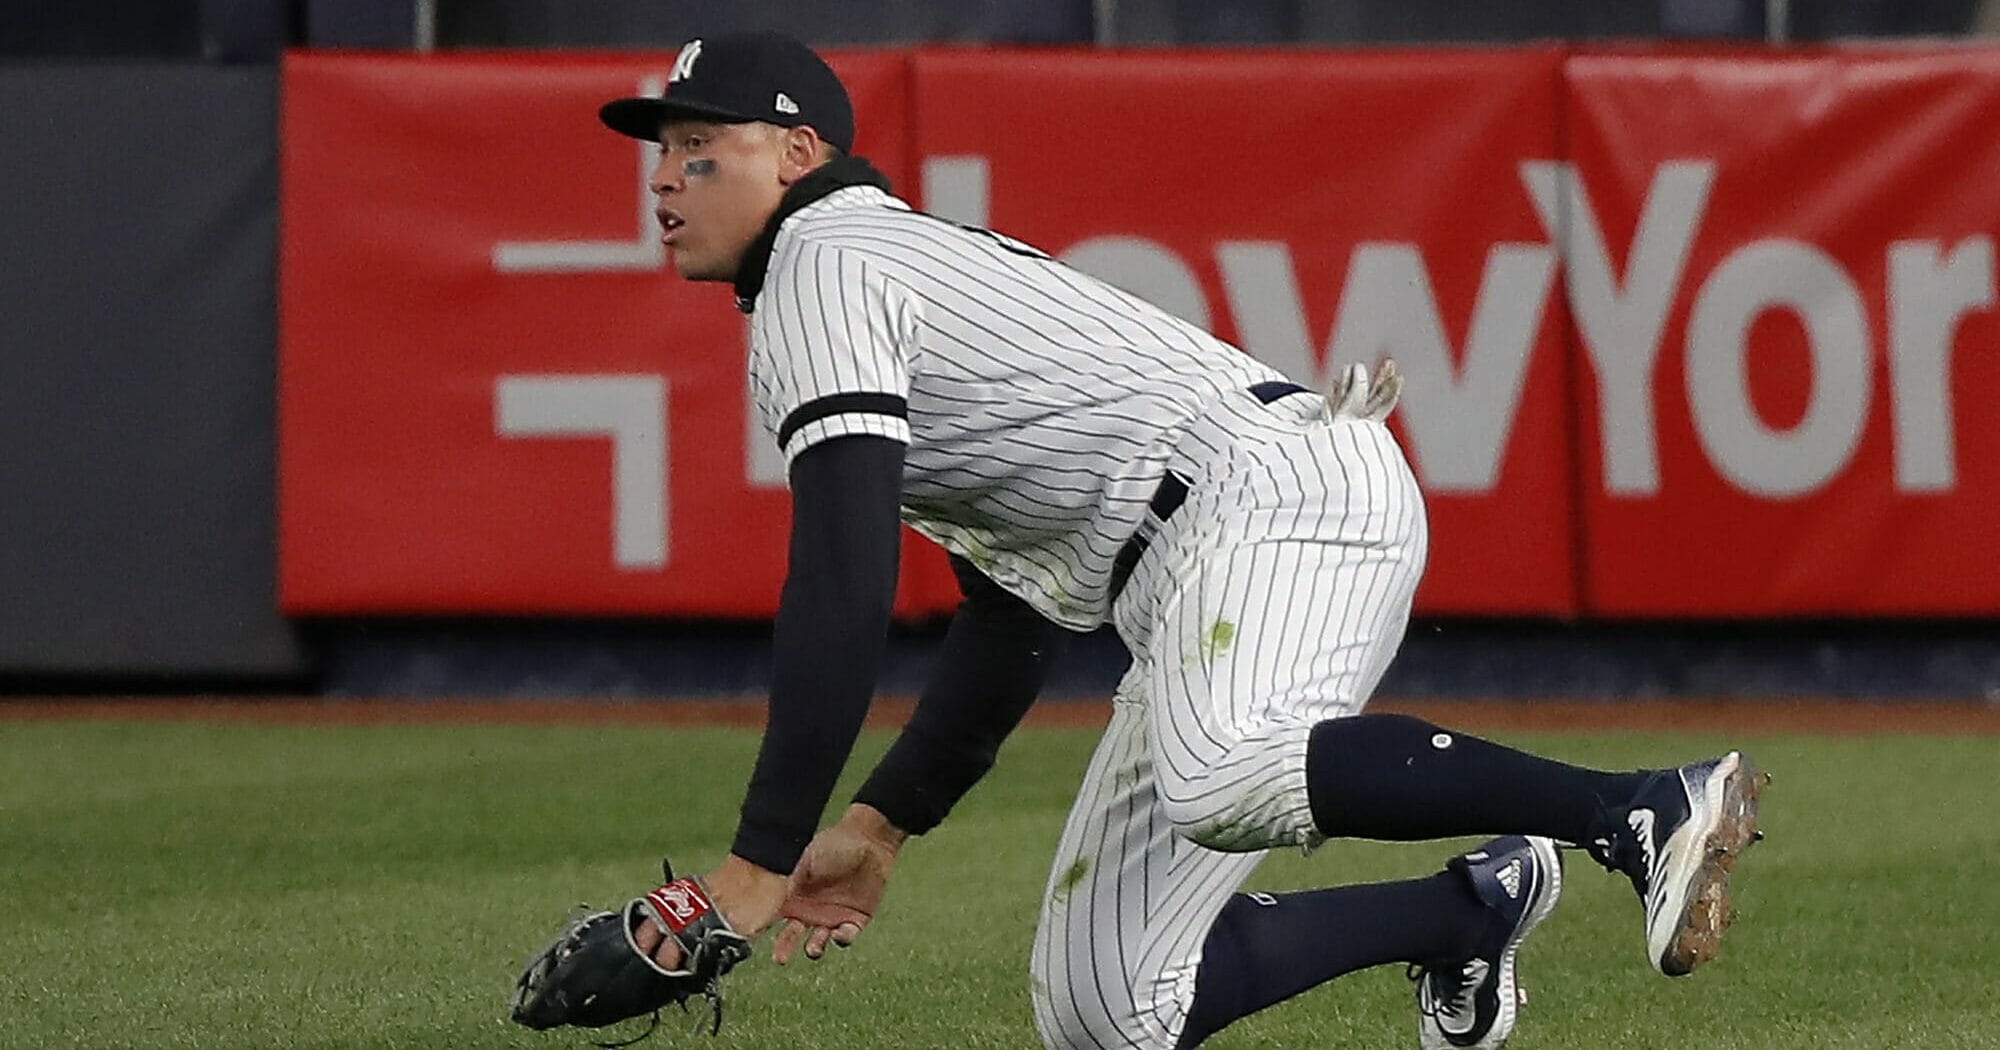 New York Yankees right fielder Aaron Judge comes up off the grass after catching a line drive by Detroit Tigers' Niko Goodrum with two men on base during the eighth inning of a baseball game, Monday, April 1, 2019, in New York.